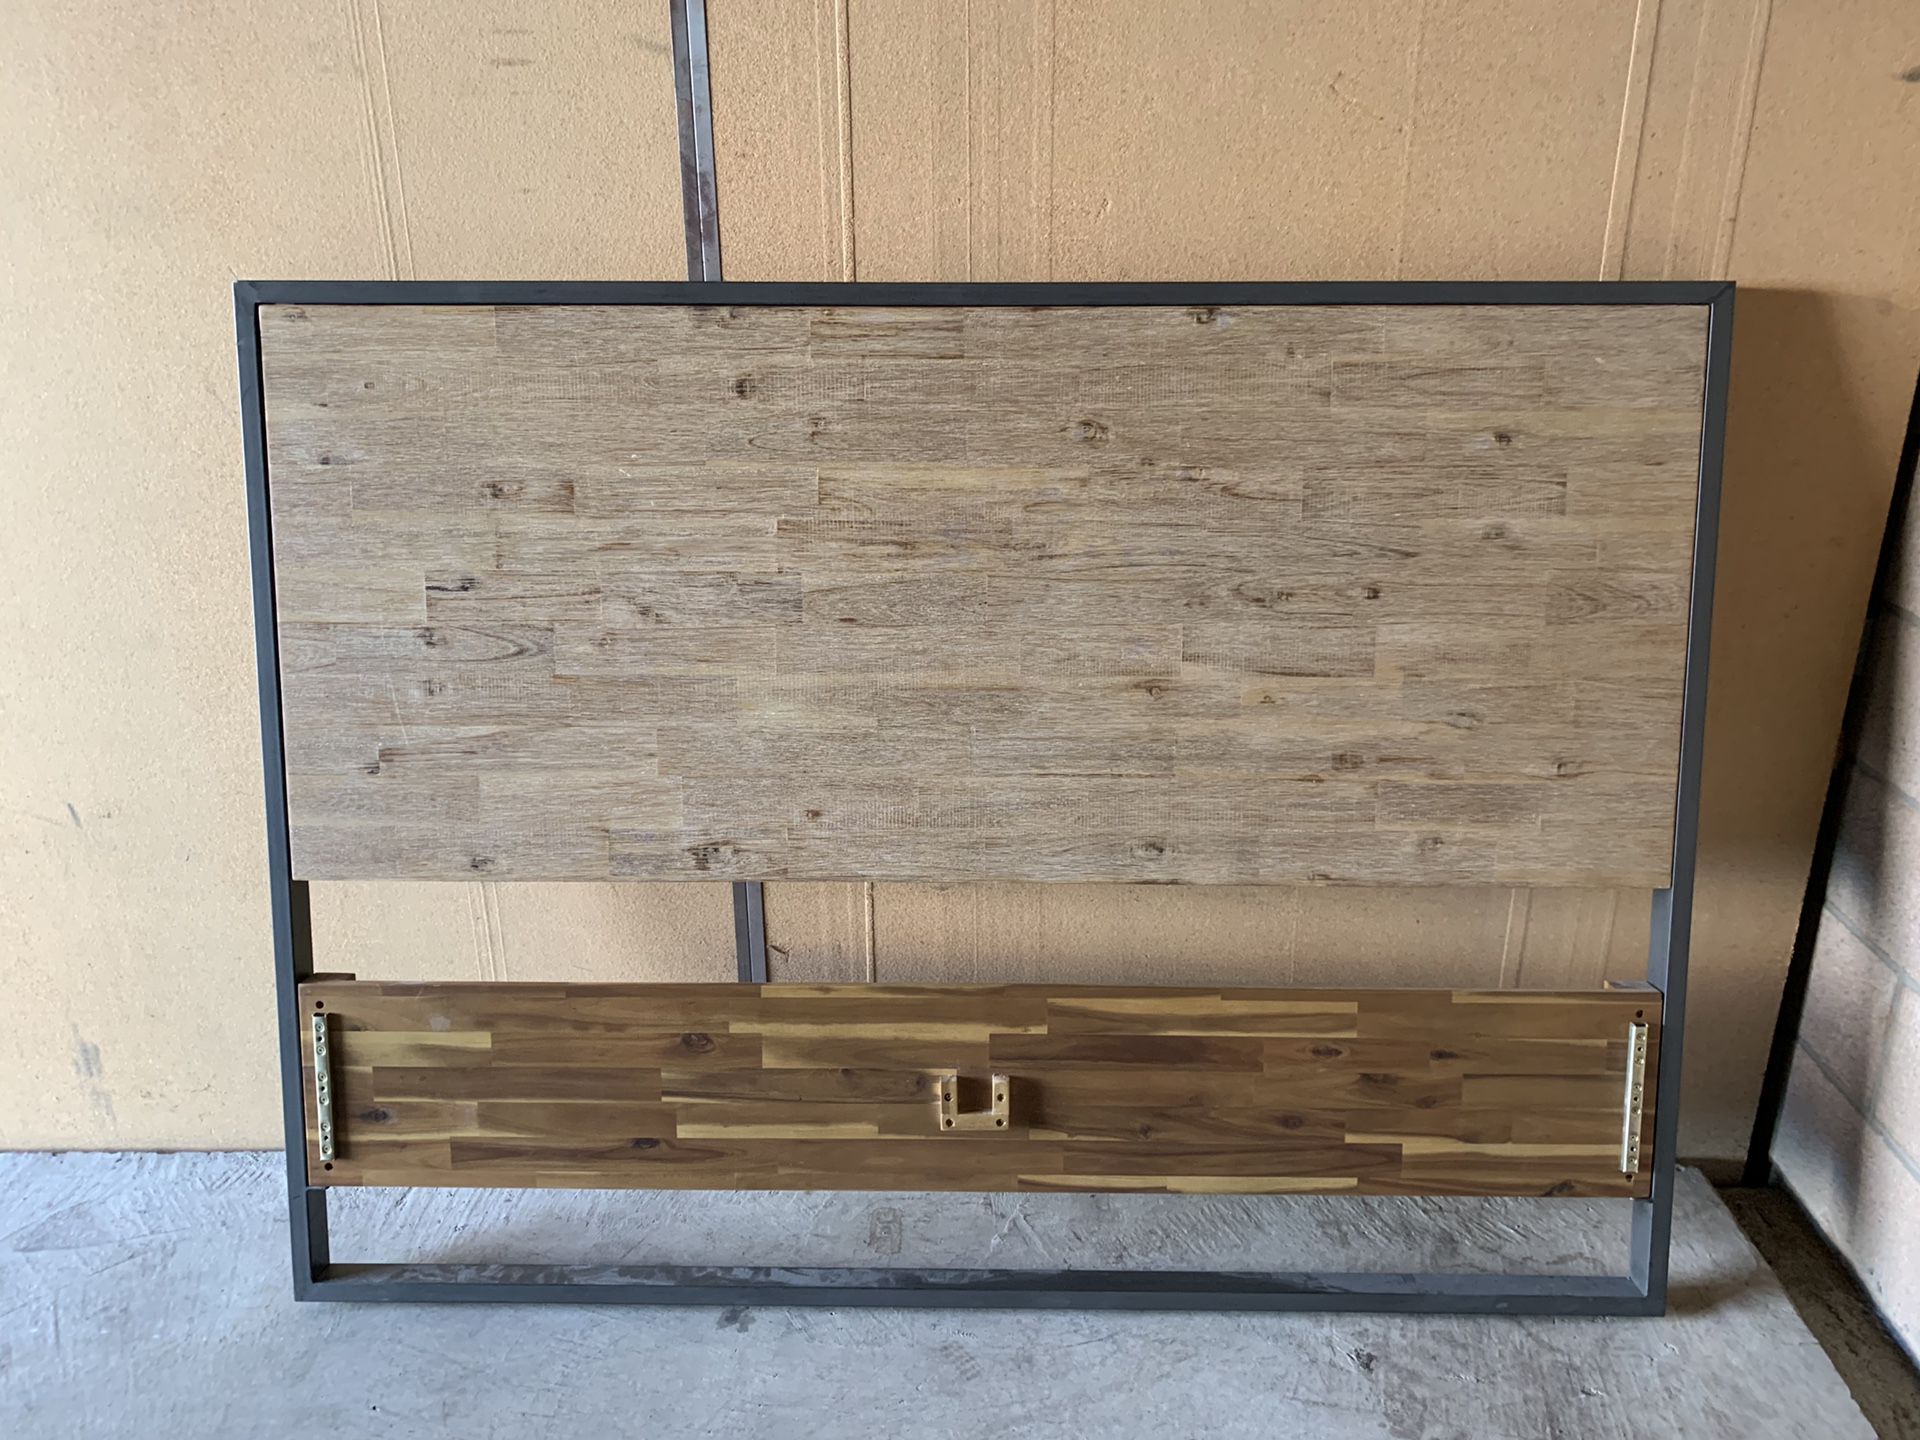 Queen bed headboard and matching frame